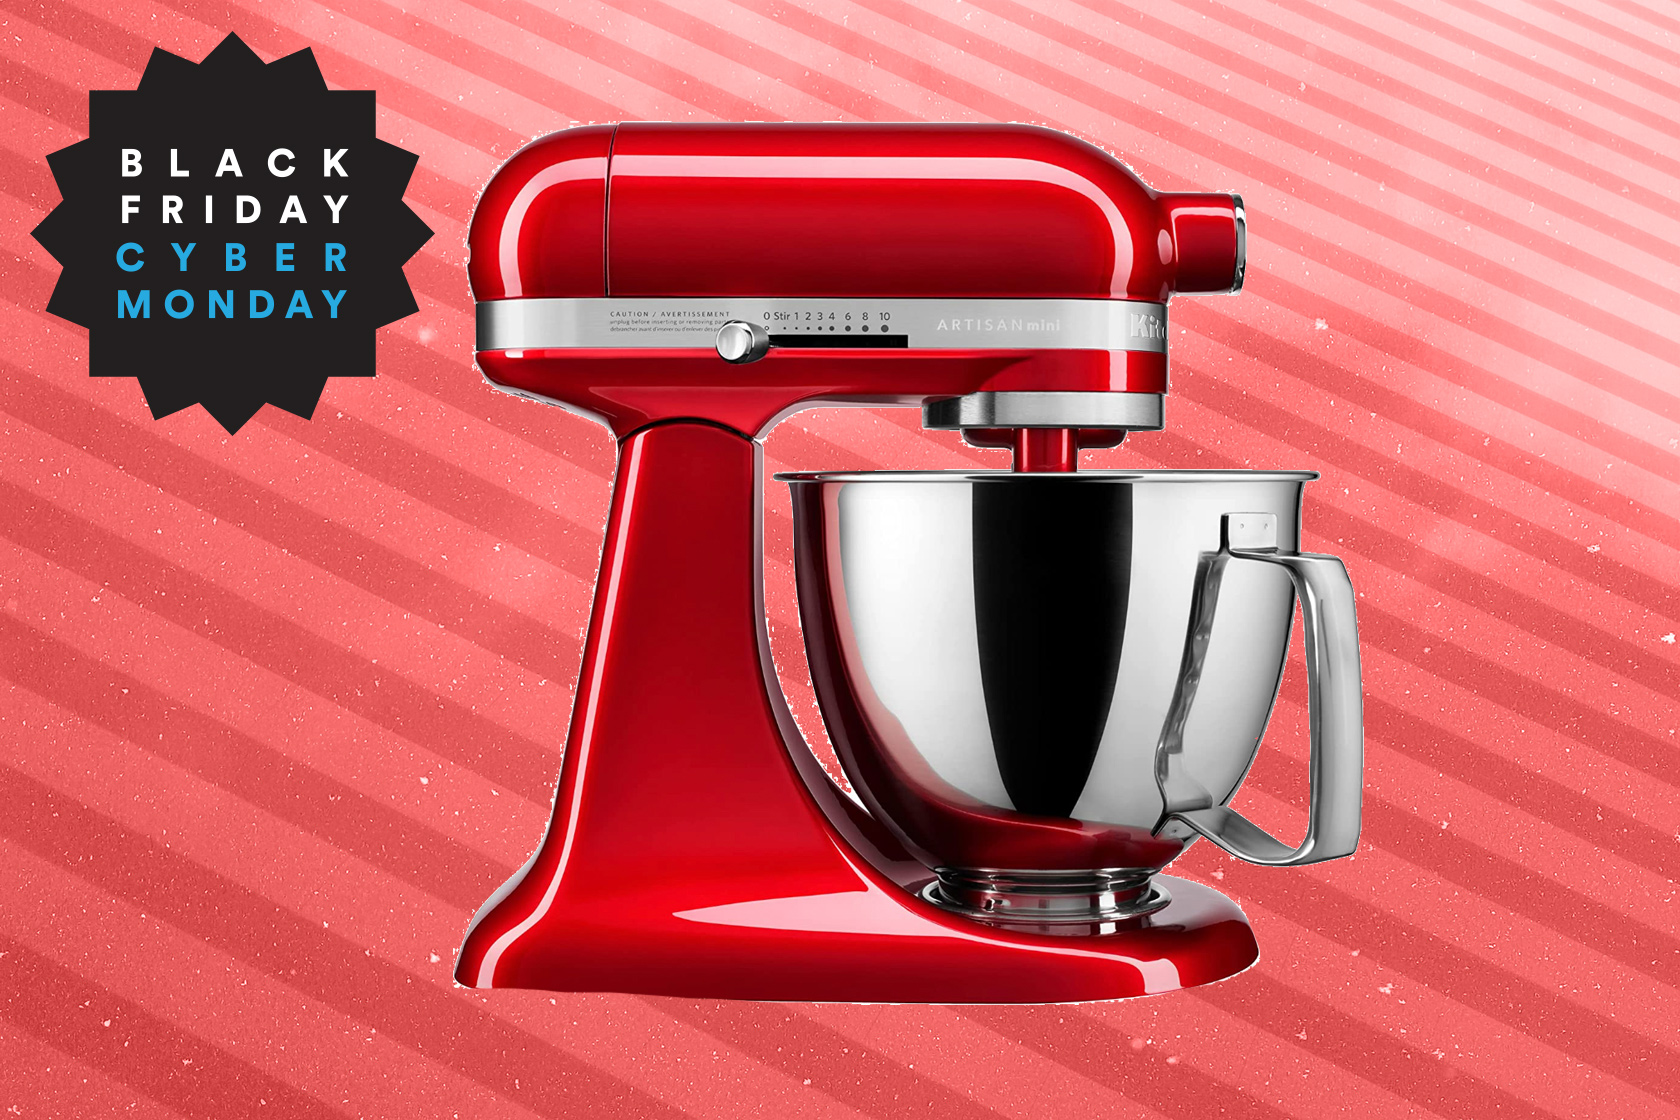 Forstå Alcatraz Island anbefale Get a mini KitchenAid stand mixer for $120 off at Amazon today